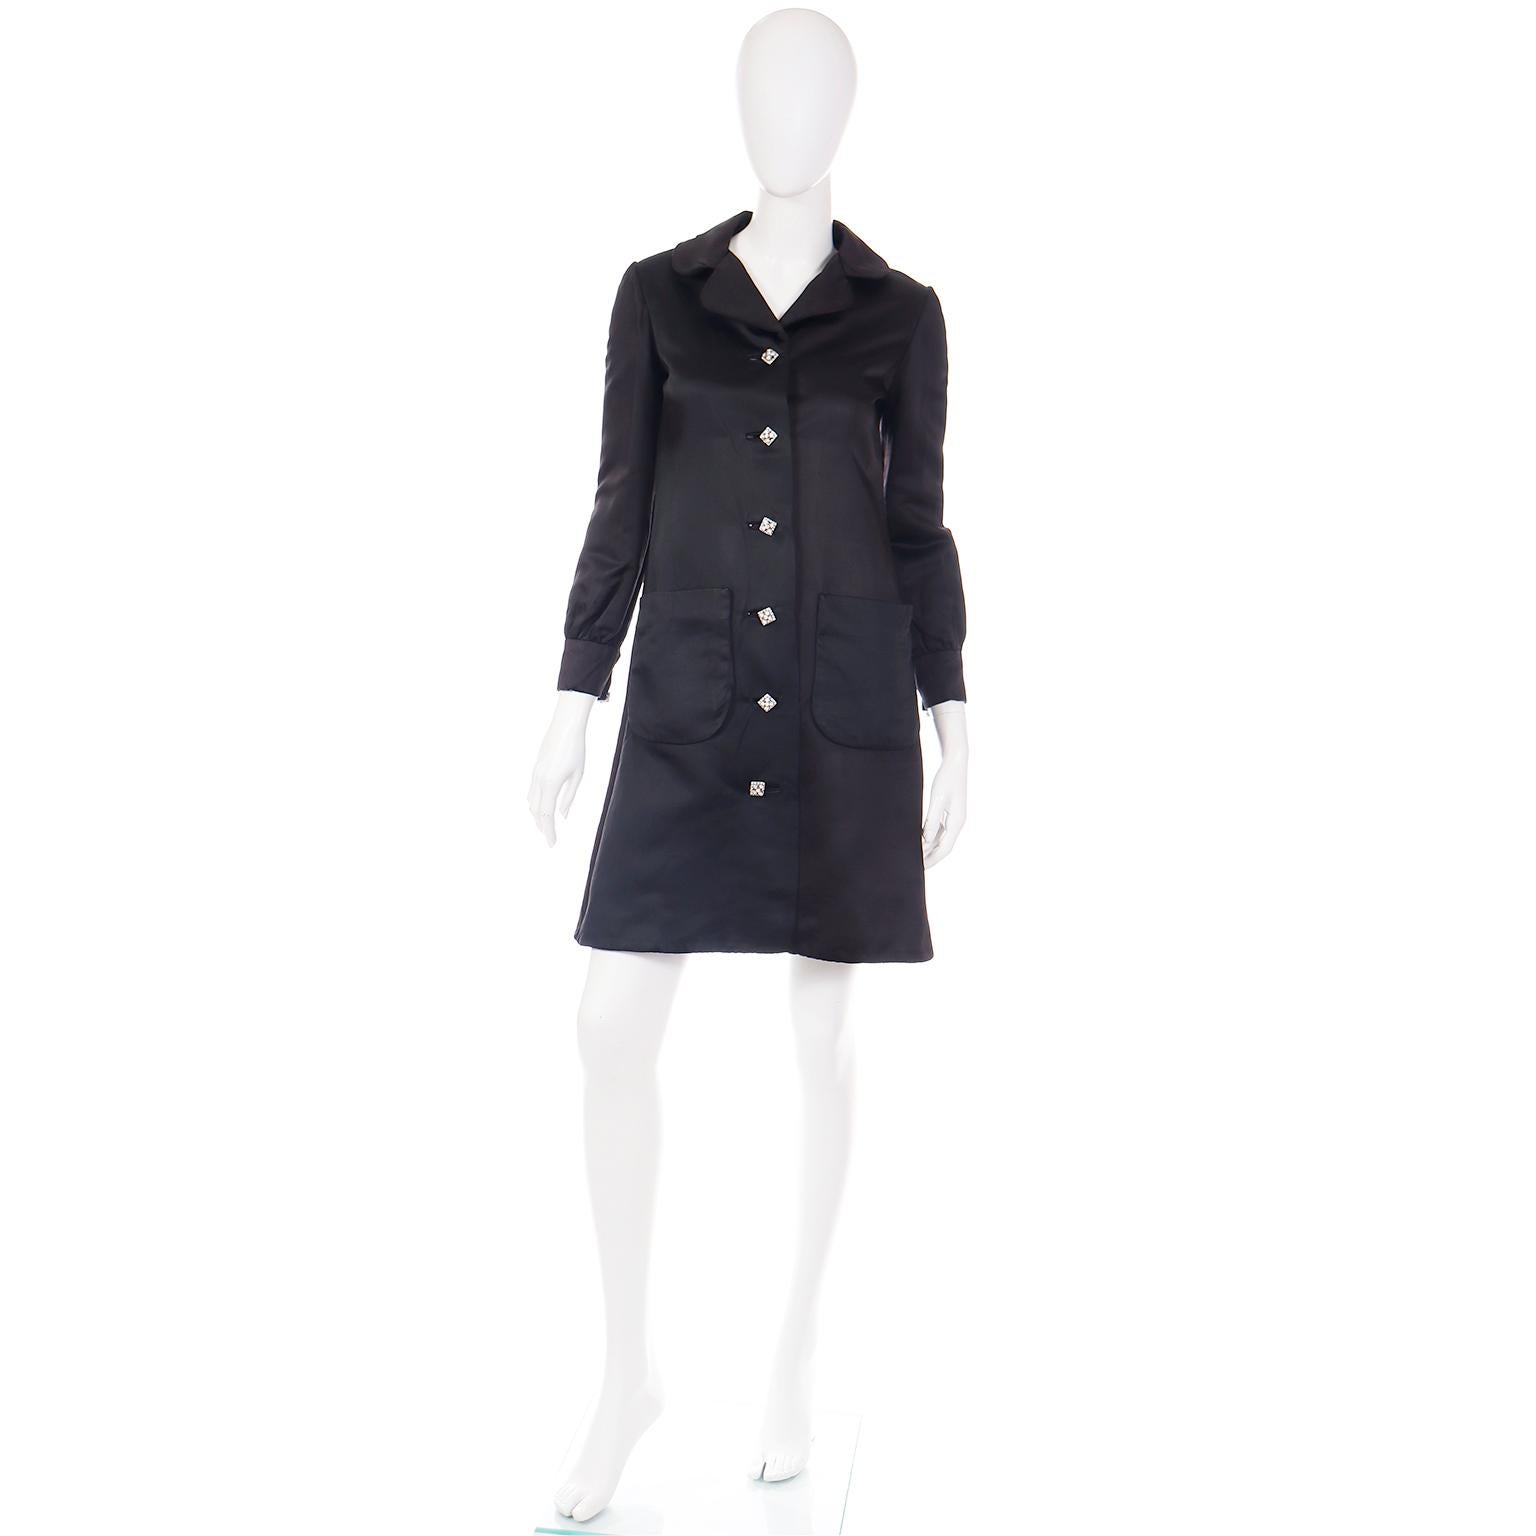 We love finding vintage Oscar de la Renta pieces and we fell in love with this gorgeous 1960's evening coat instantly! This lovely black satin coat has front patch pockets and beautiful square silver buttons set with rhinestones. The coat is fully